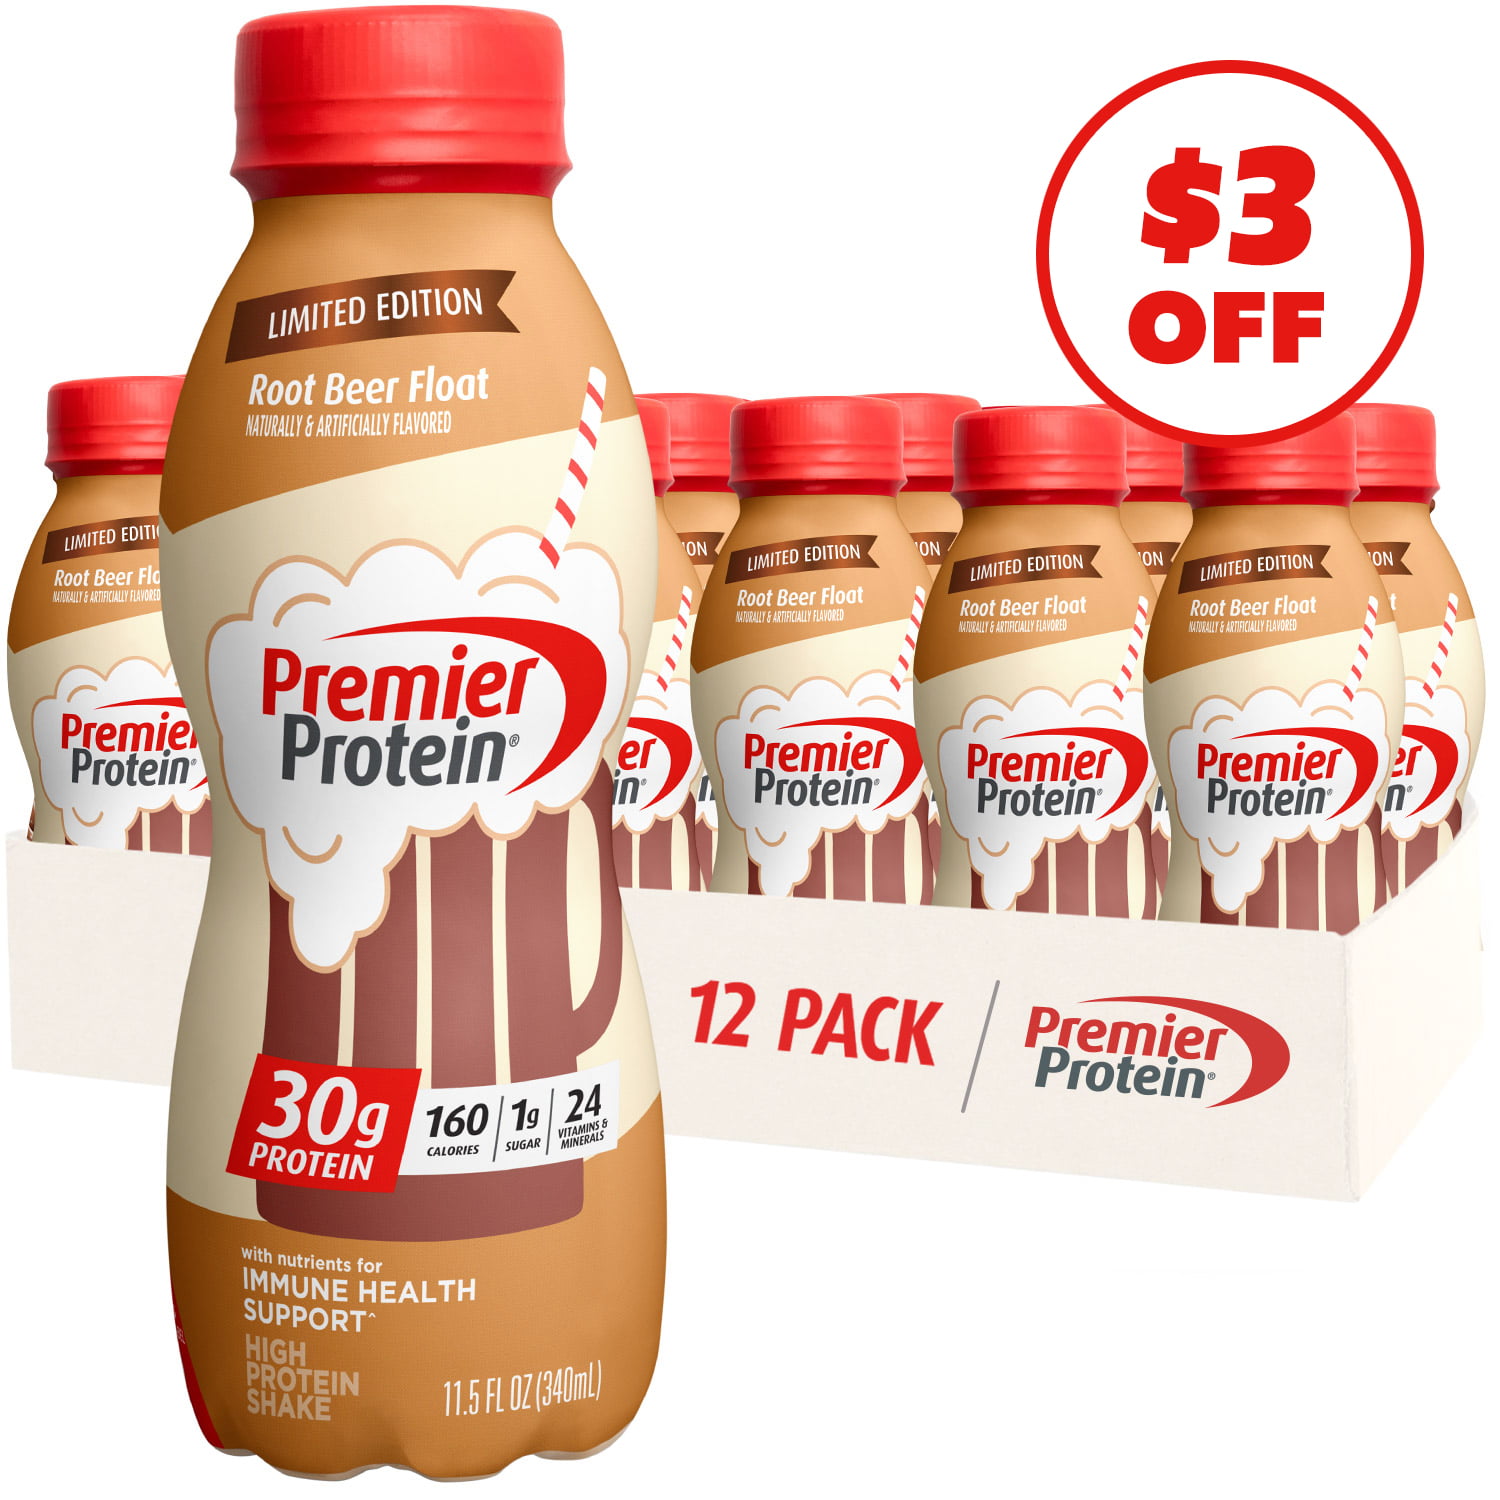 Premier Protein Shake, Root Beer Float Limited Time, 30g Protein, 11.5 fl oz, 12 Ct